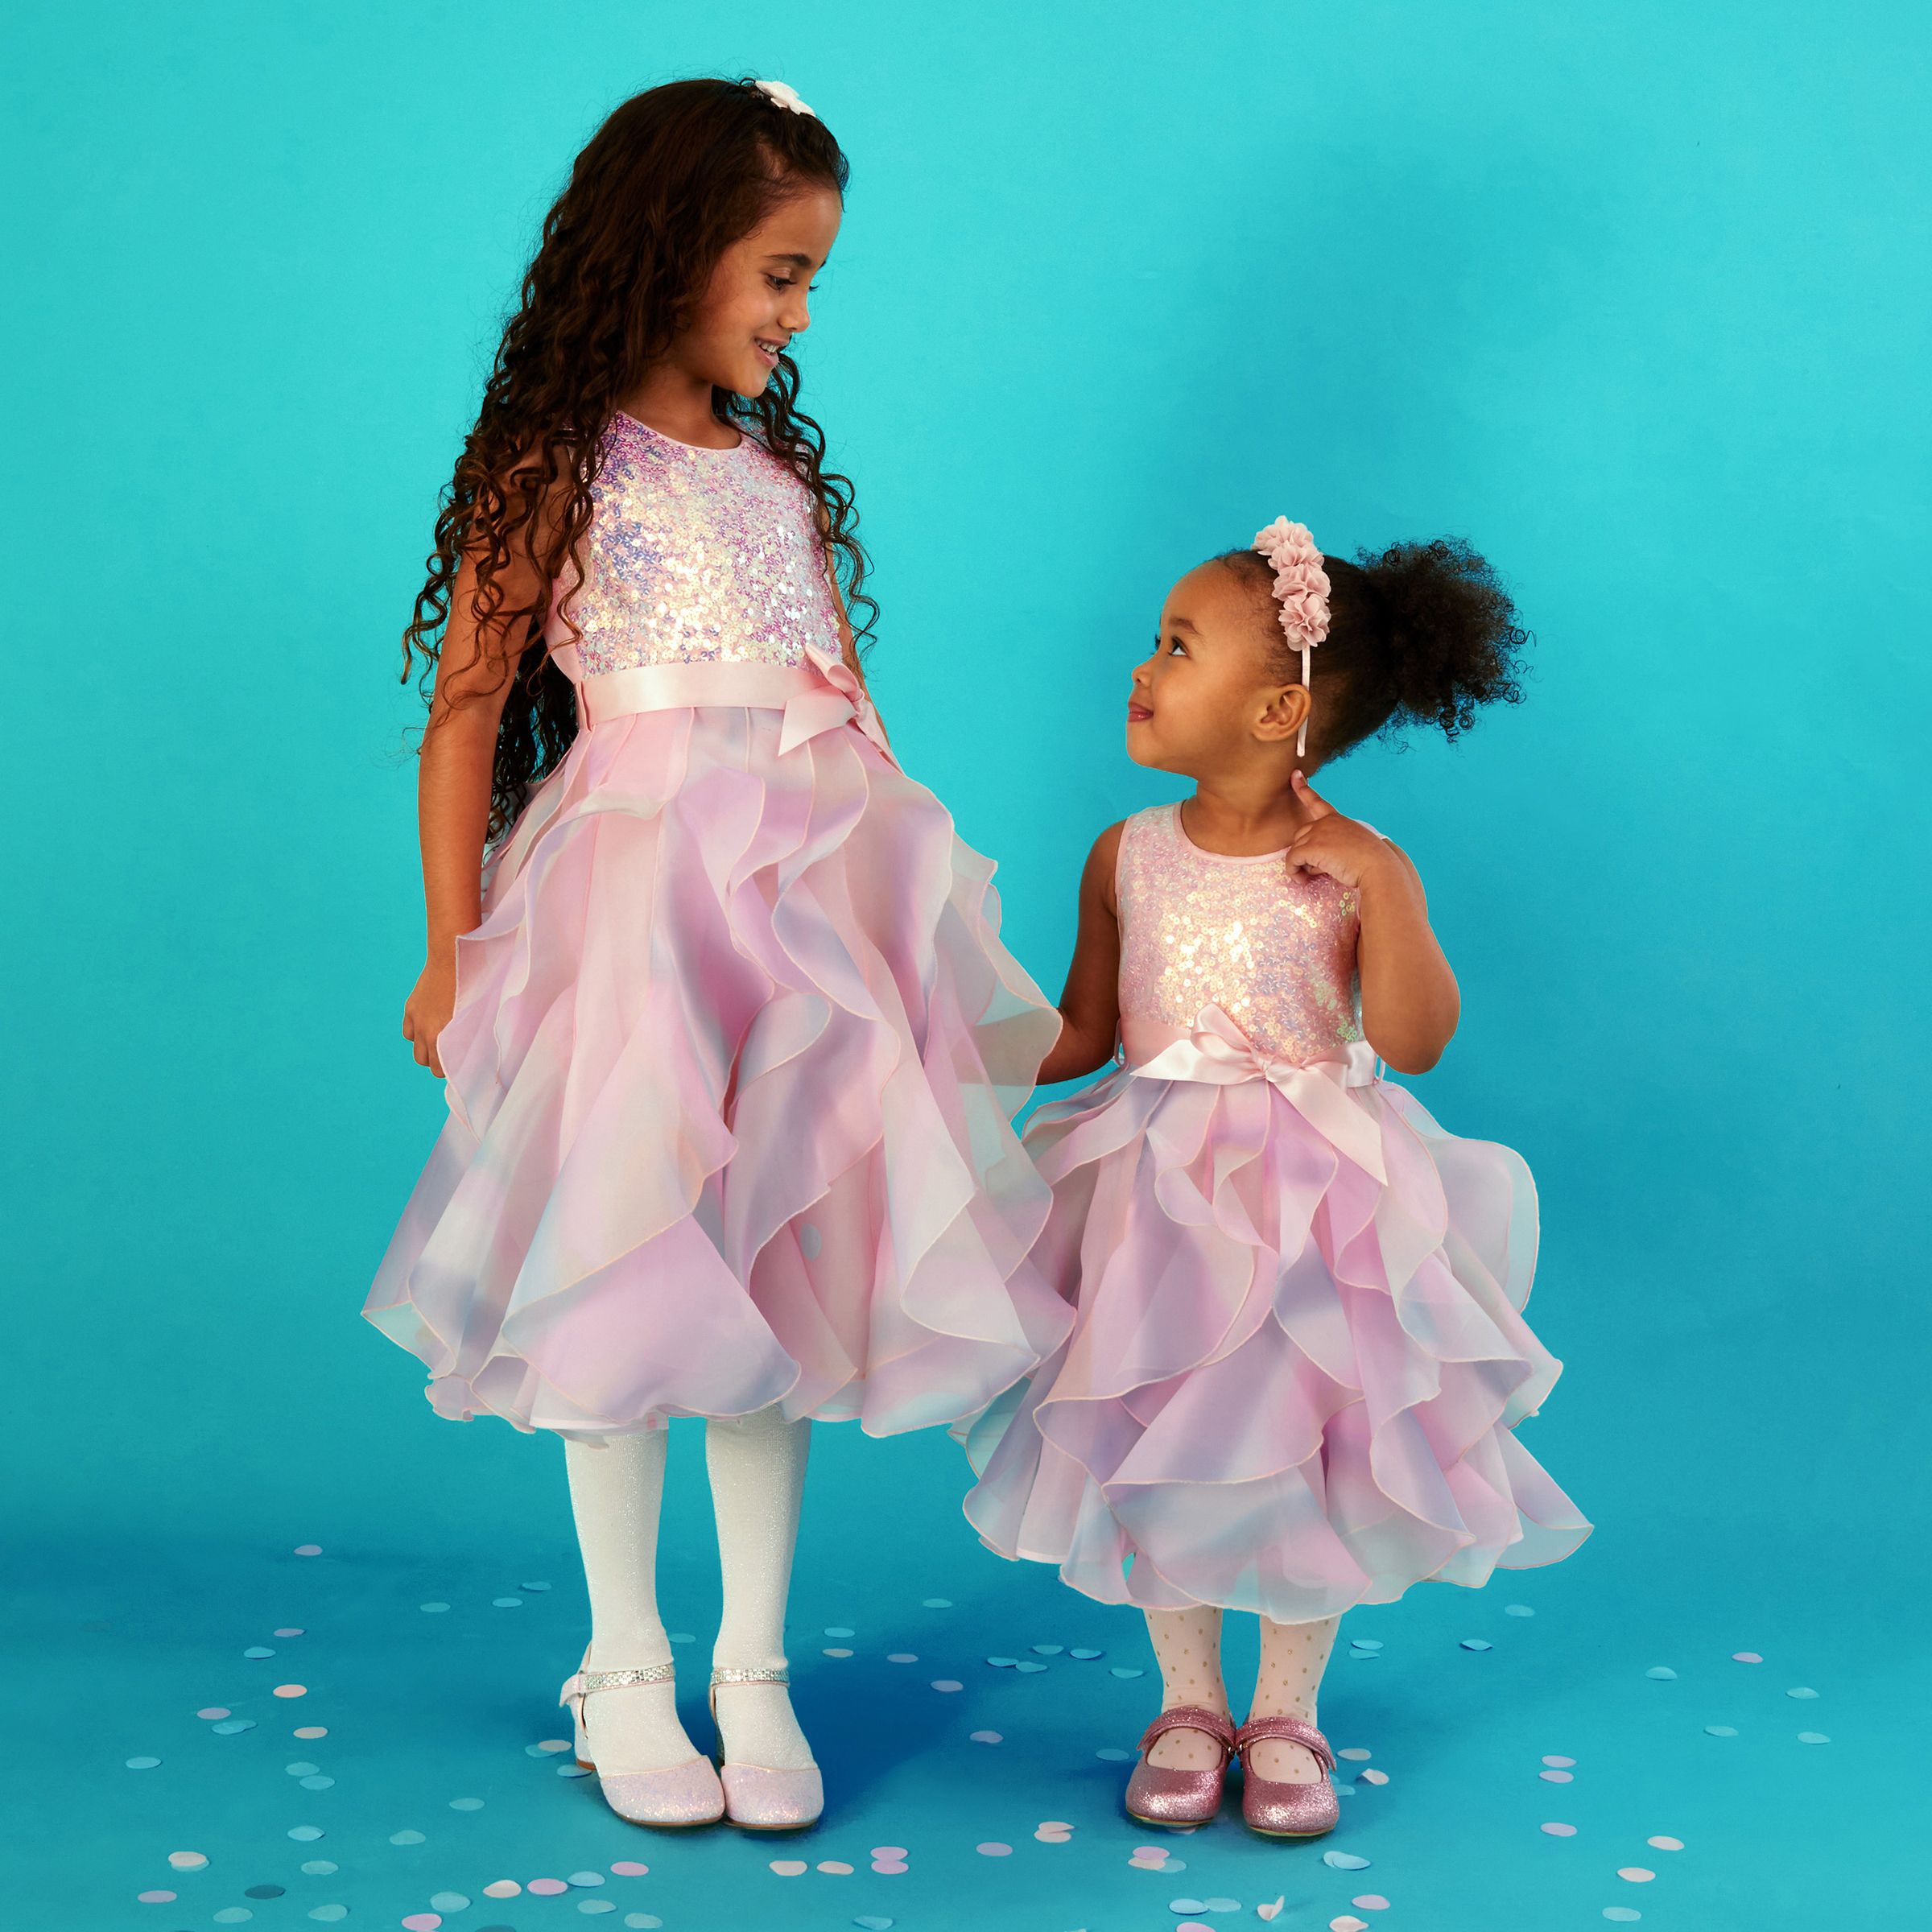 Bridesmaid & Flower Girl Outfits